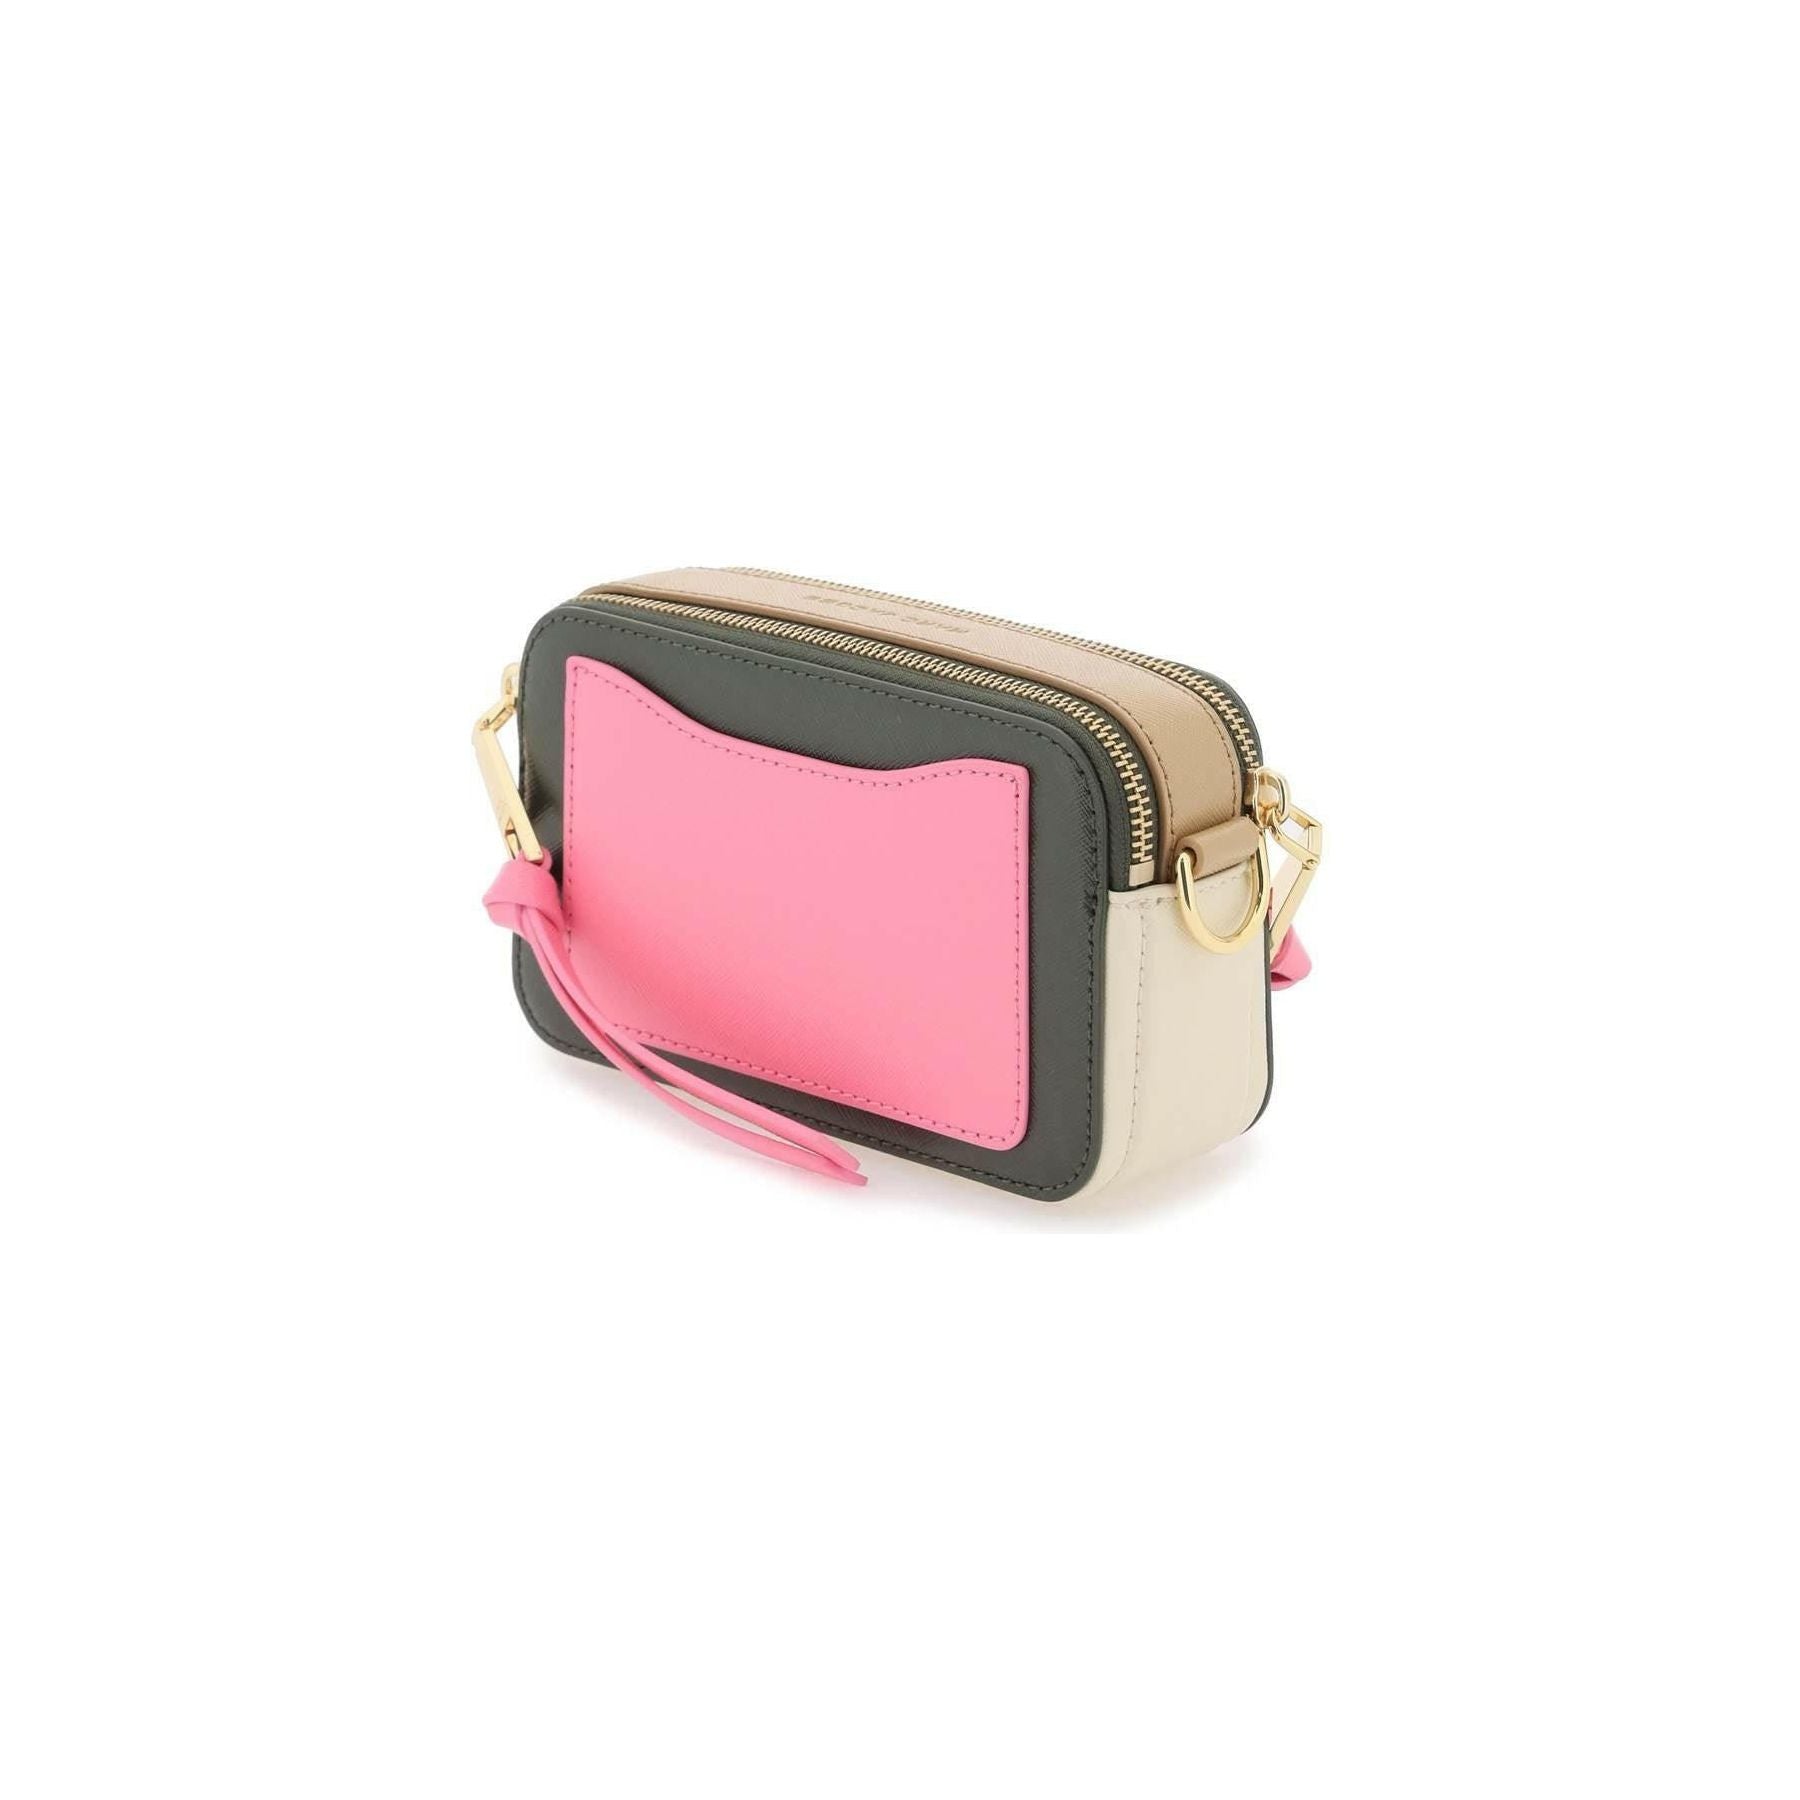 Forest Green and Pink Multi The Snapshot Camera Bag MARC JACOBS JOHN JULIA.